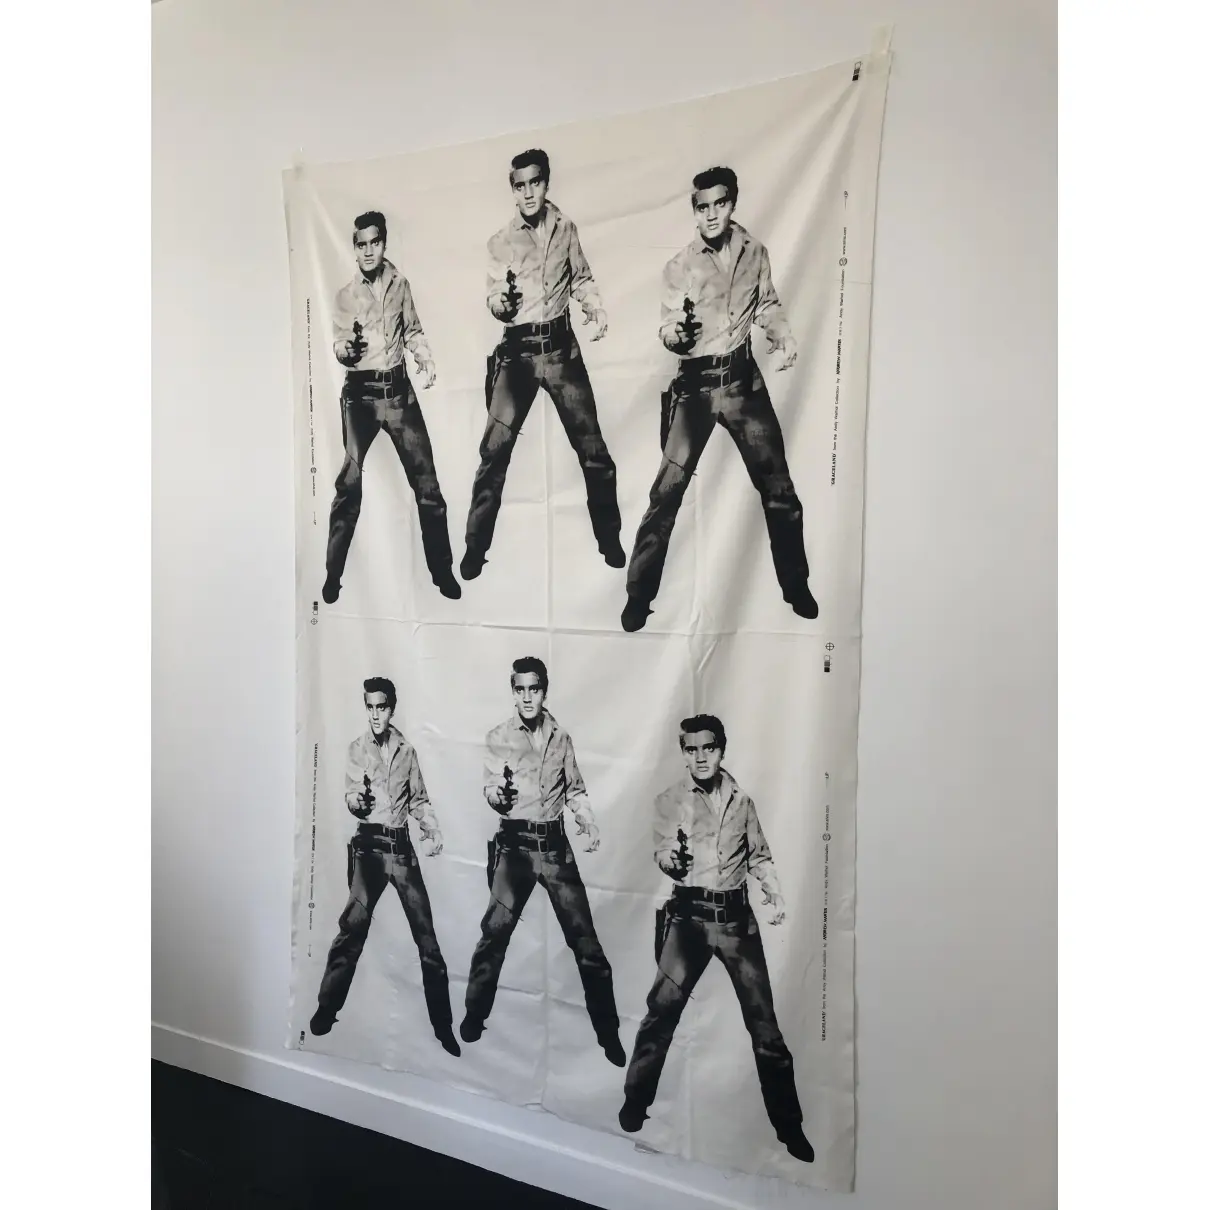 Buy Andy Warhol Home decor online